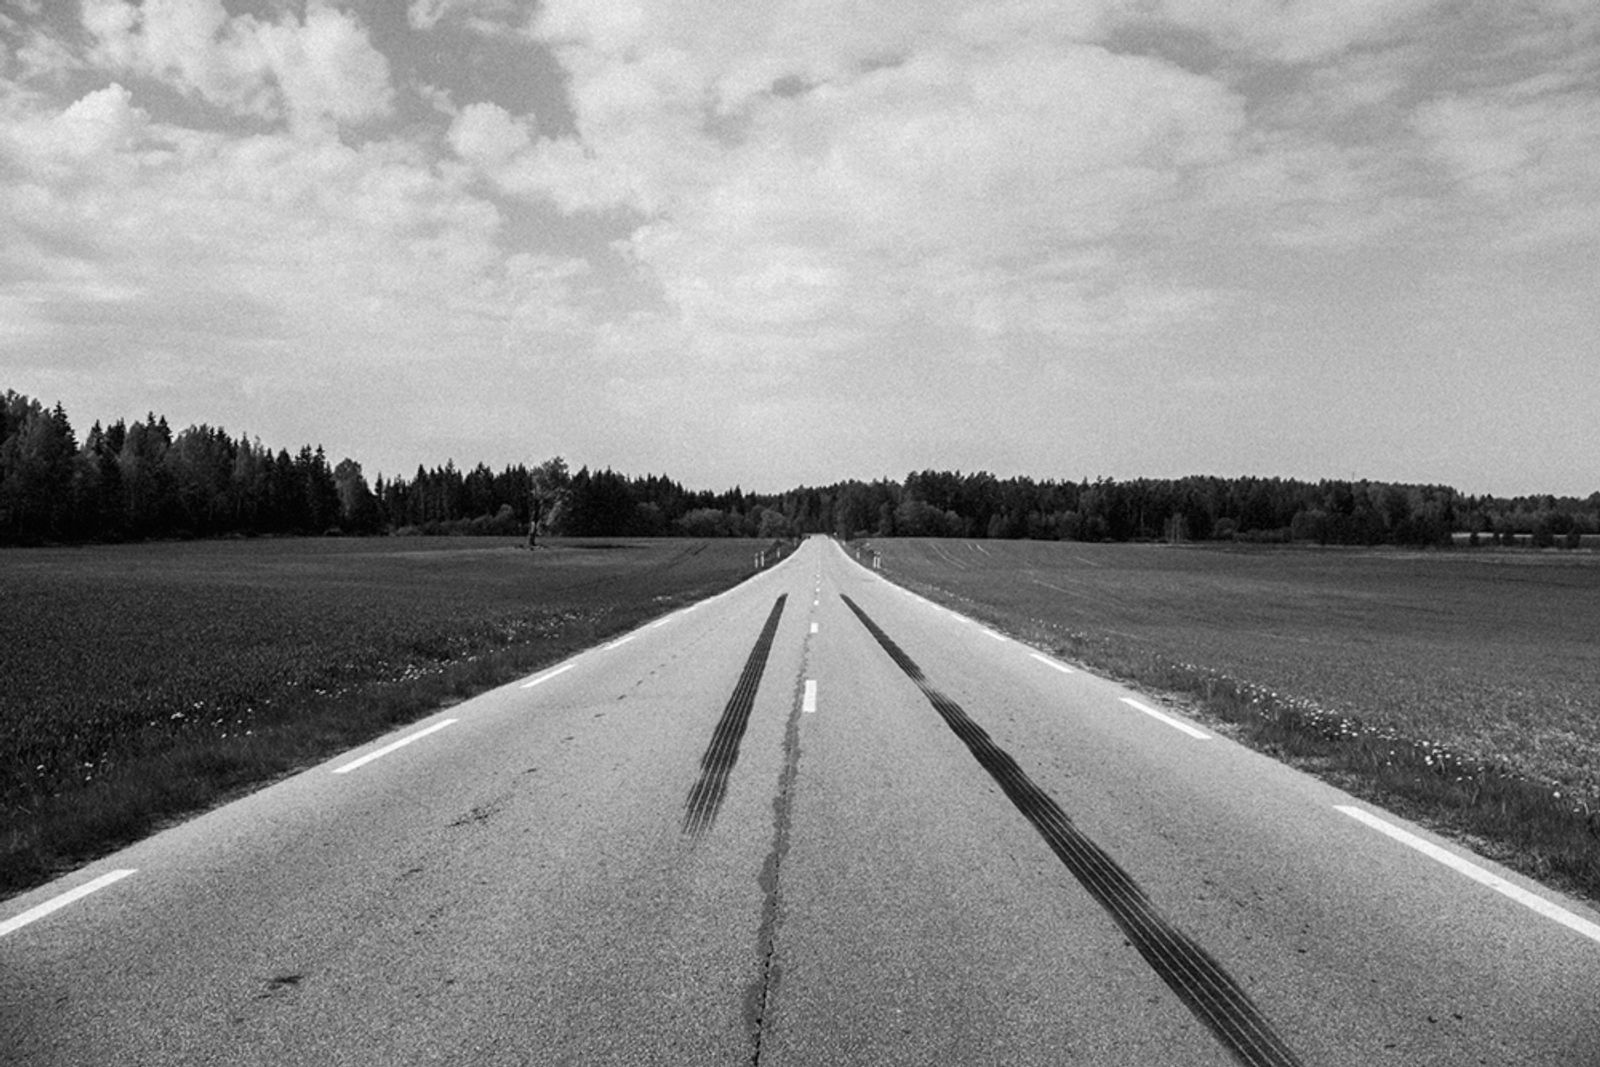 © Hannes Jung - Car tracks on a road. Lithuania, near Panevėžys, 10th of May 2016.